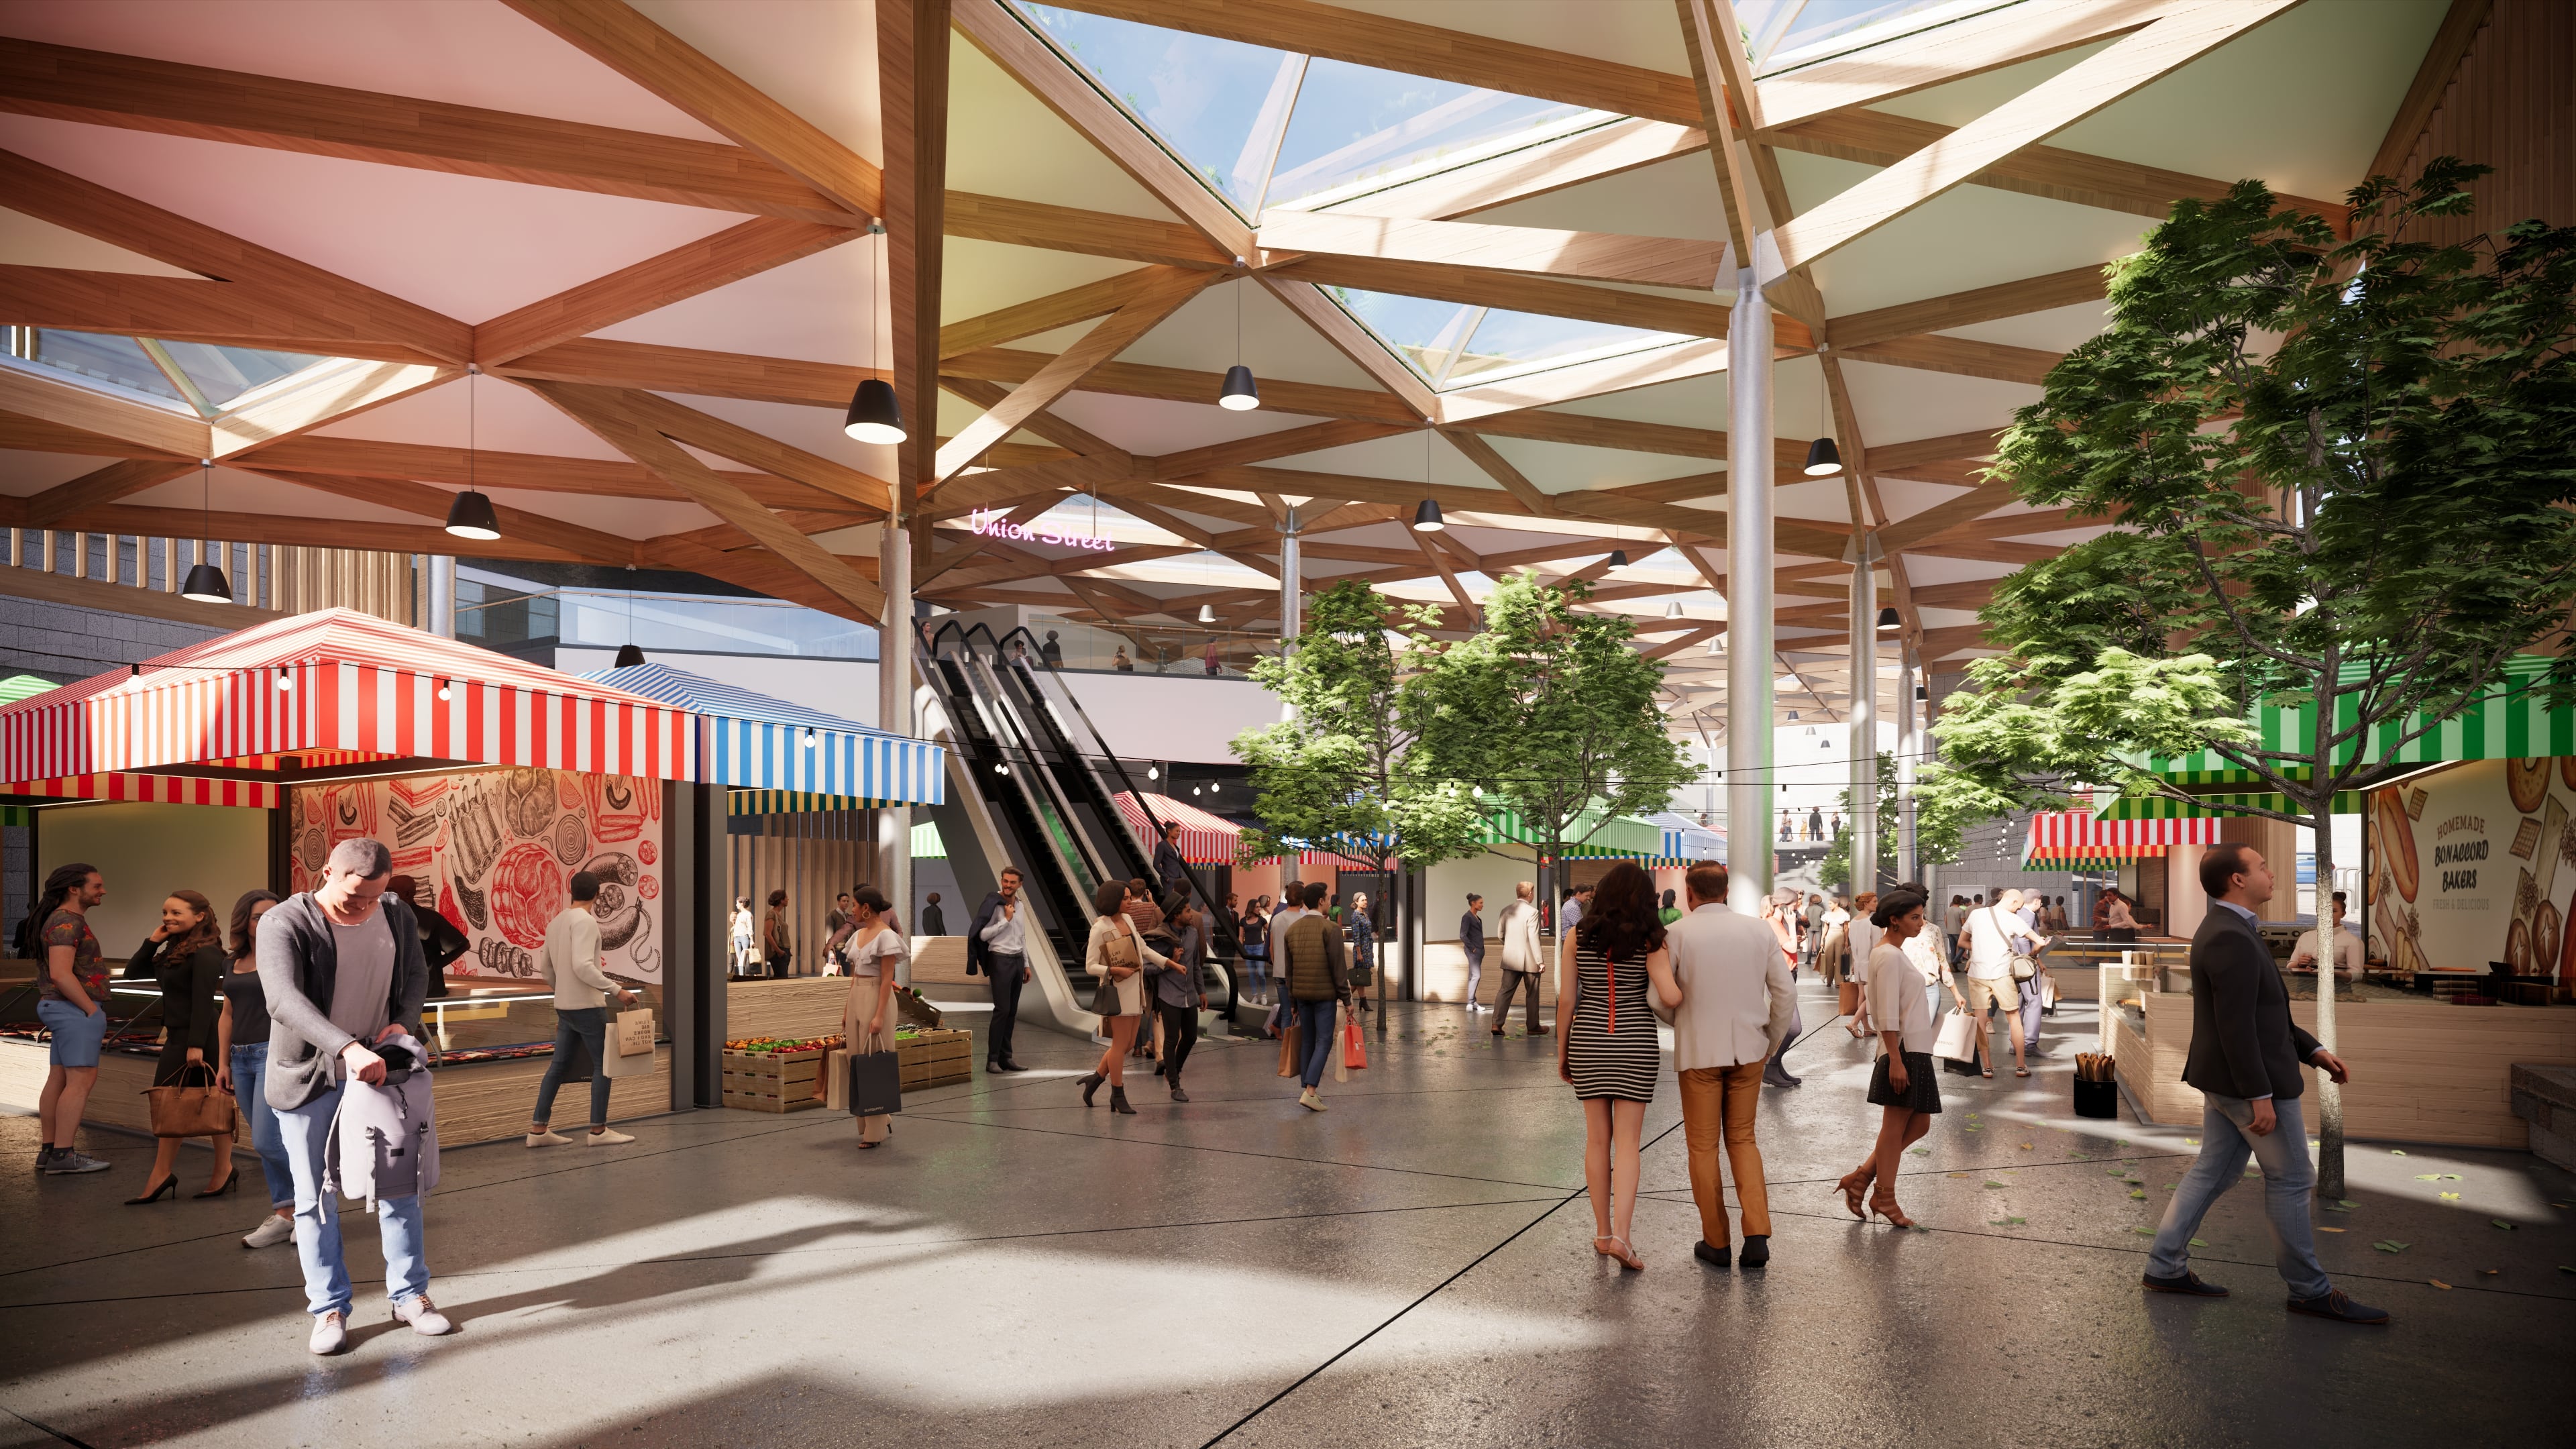 Aberdeen Market revamp progresses with site purchase agreement